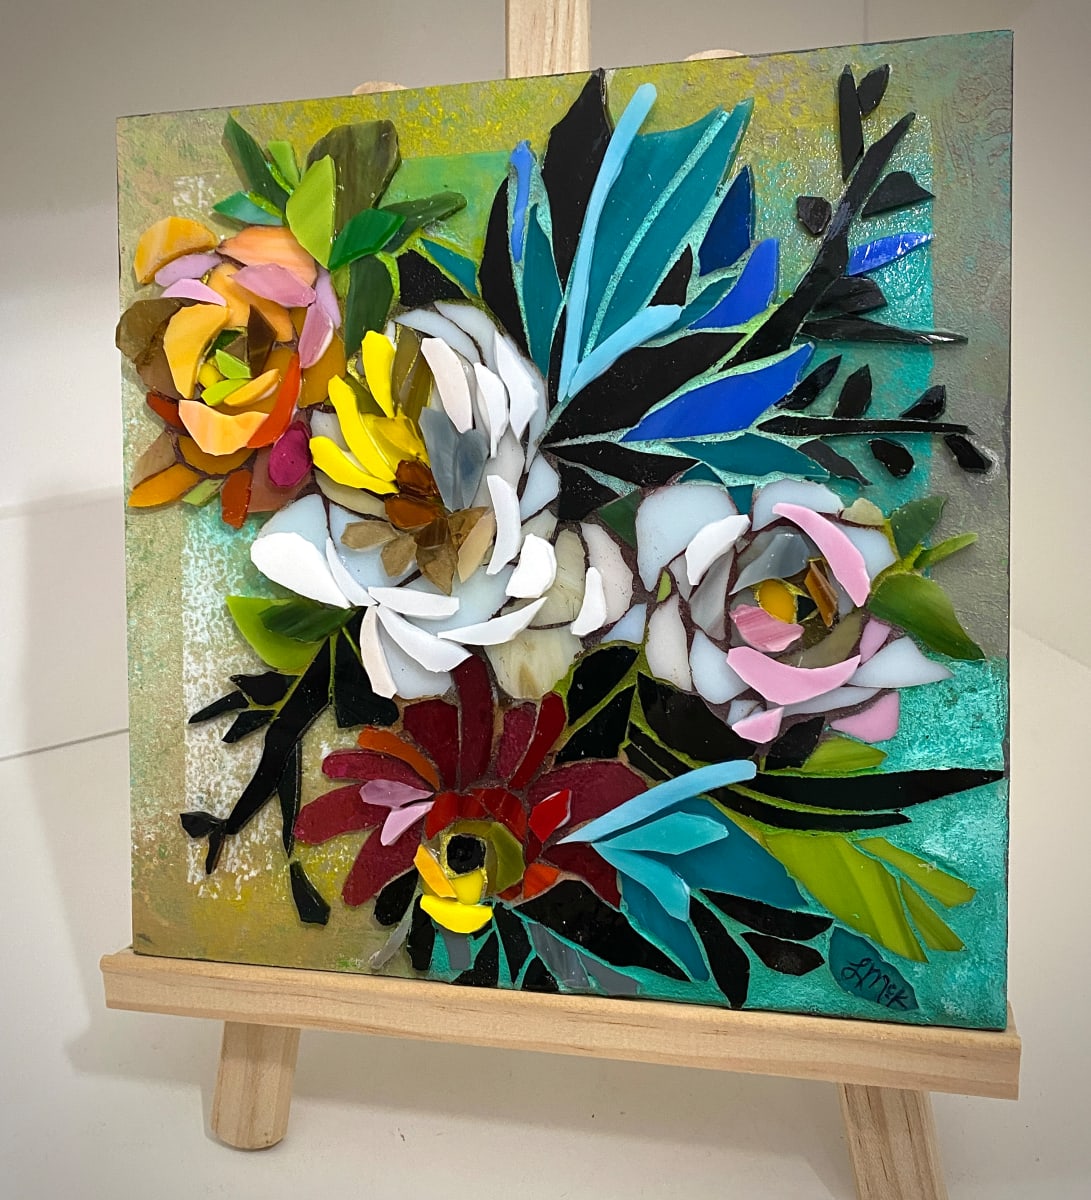 Needed Drama by Laura McKellar  Image: A dramatic floral bouquet in layered stained glass